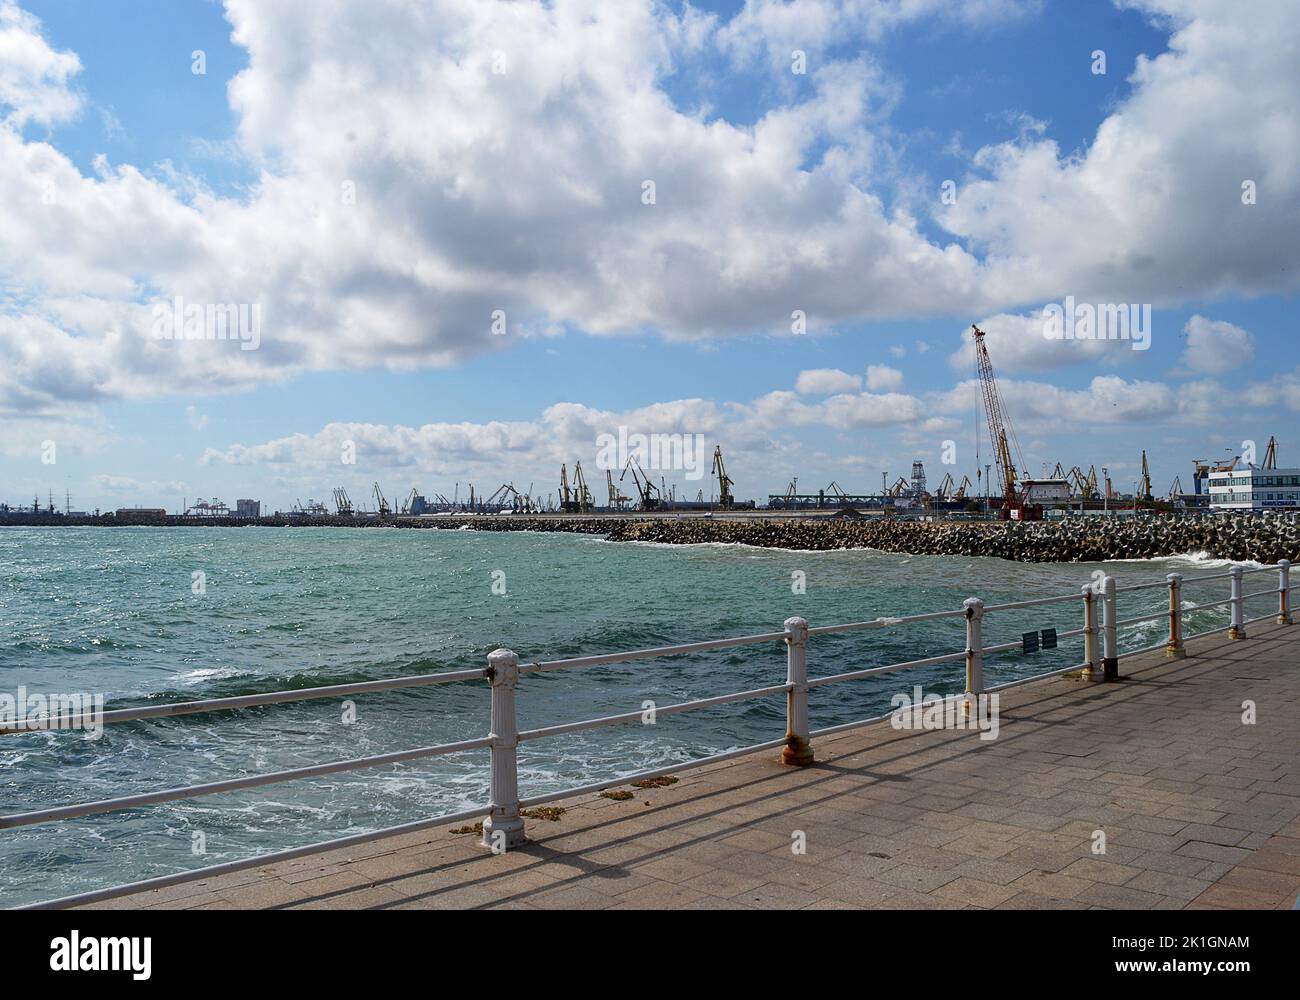 CONSTANTA, ROMANIA - SEPTEMBER 2022: The promenade at Constanta with the industrial infrastructure of the port behind. Stock Photo